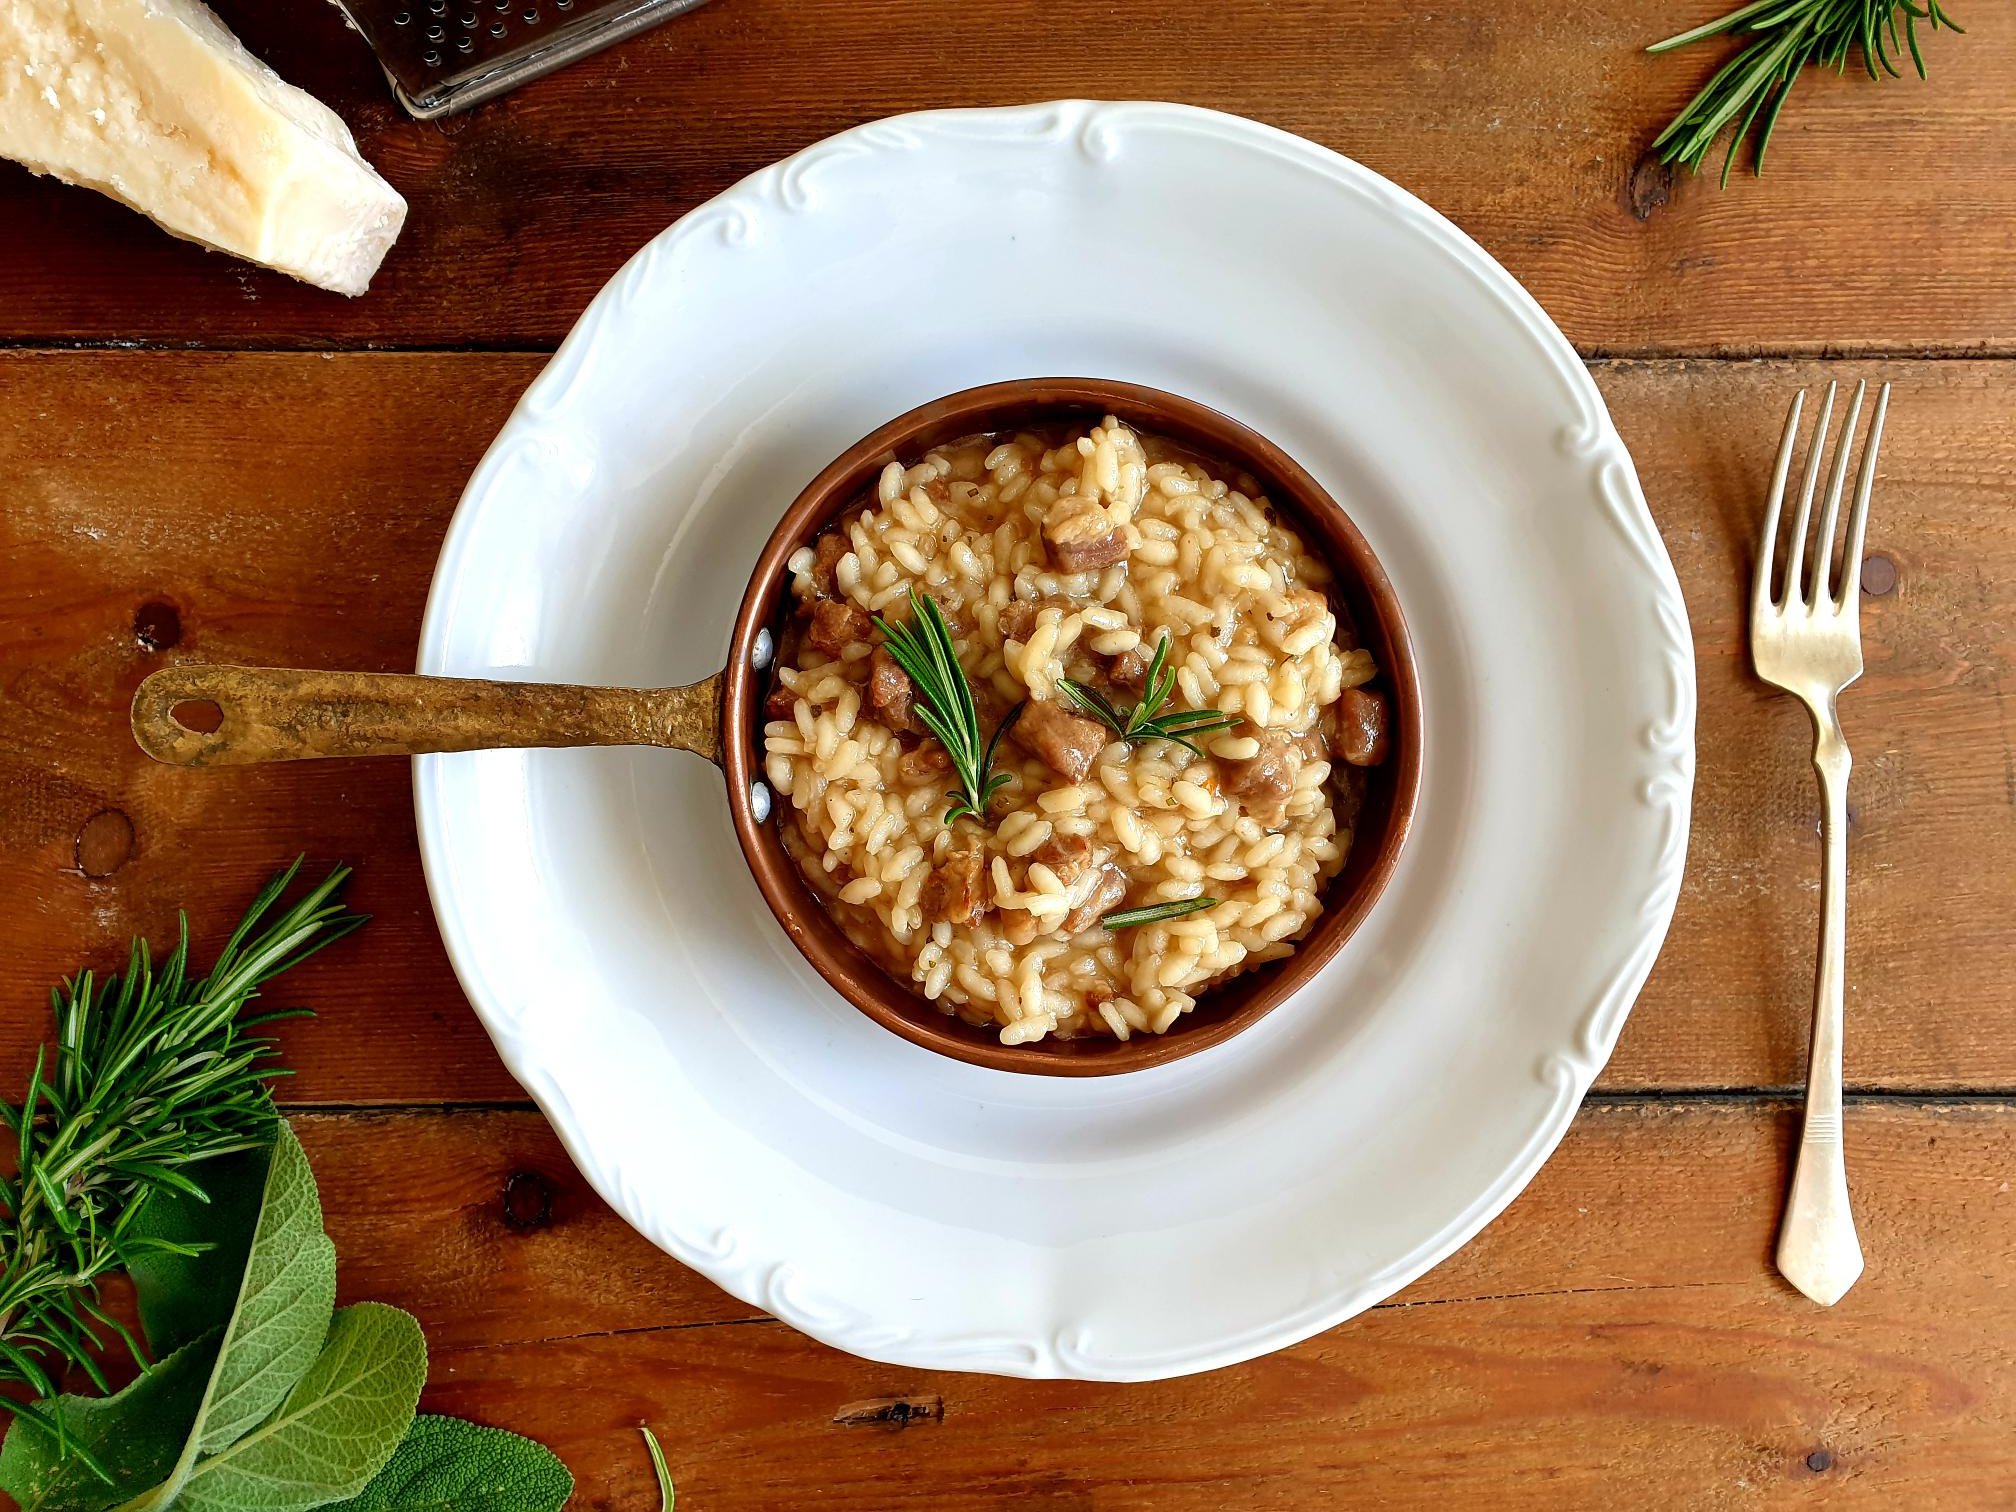 How to rustle up a basic risotto